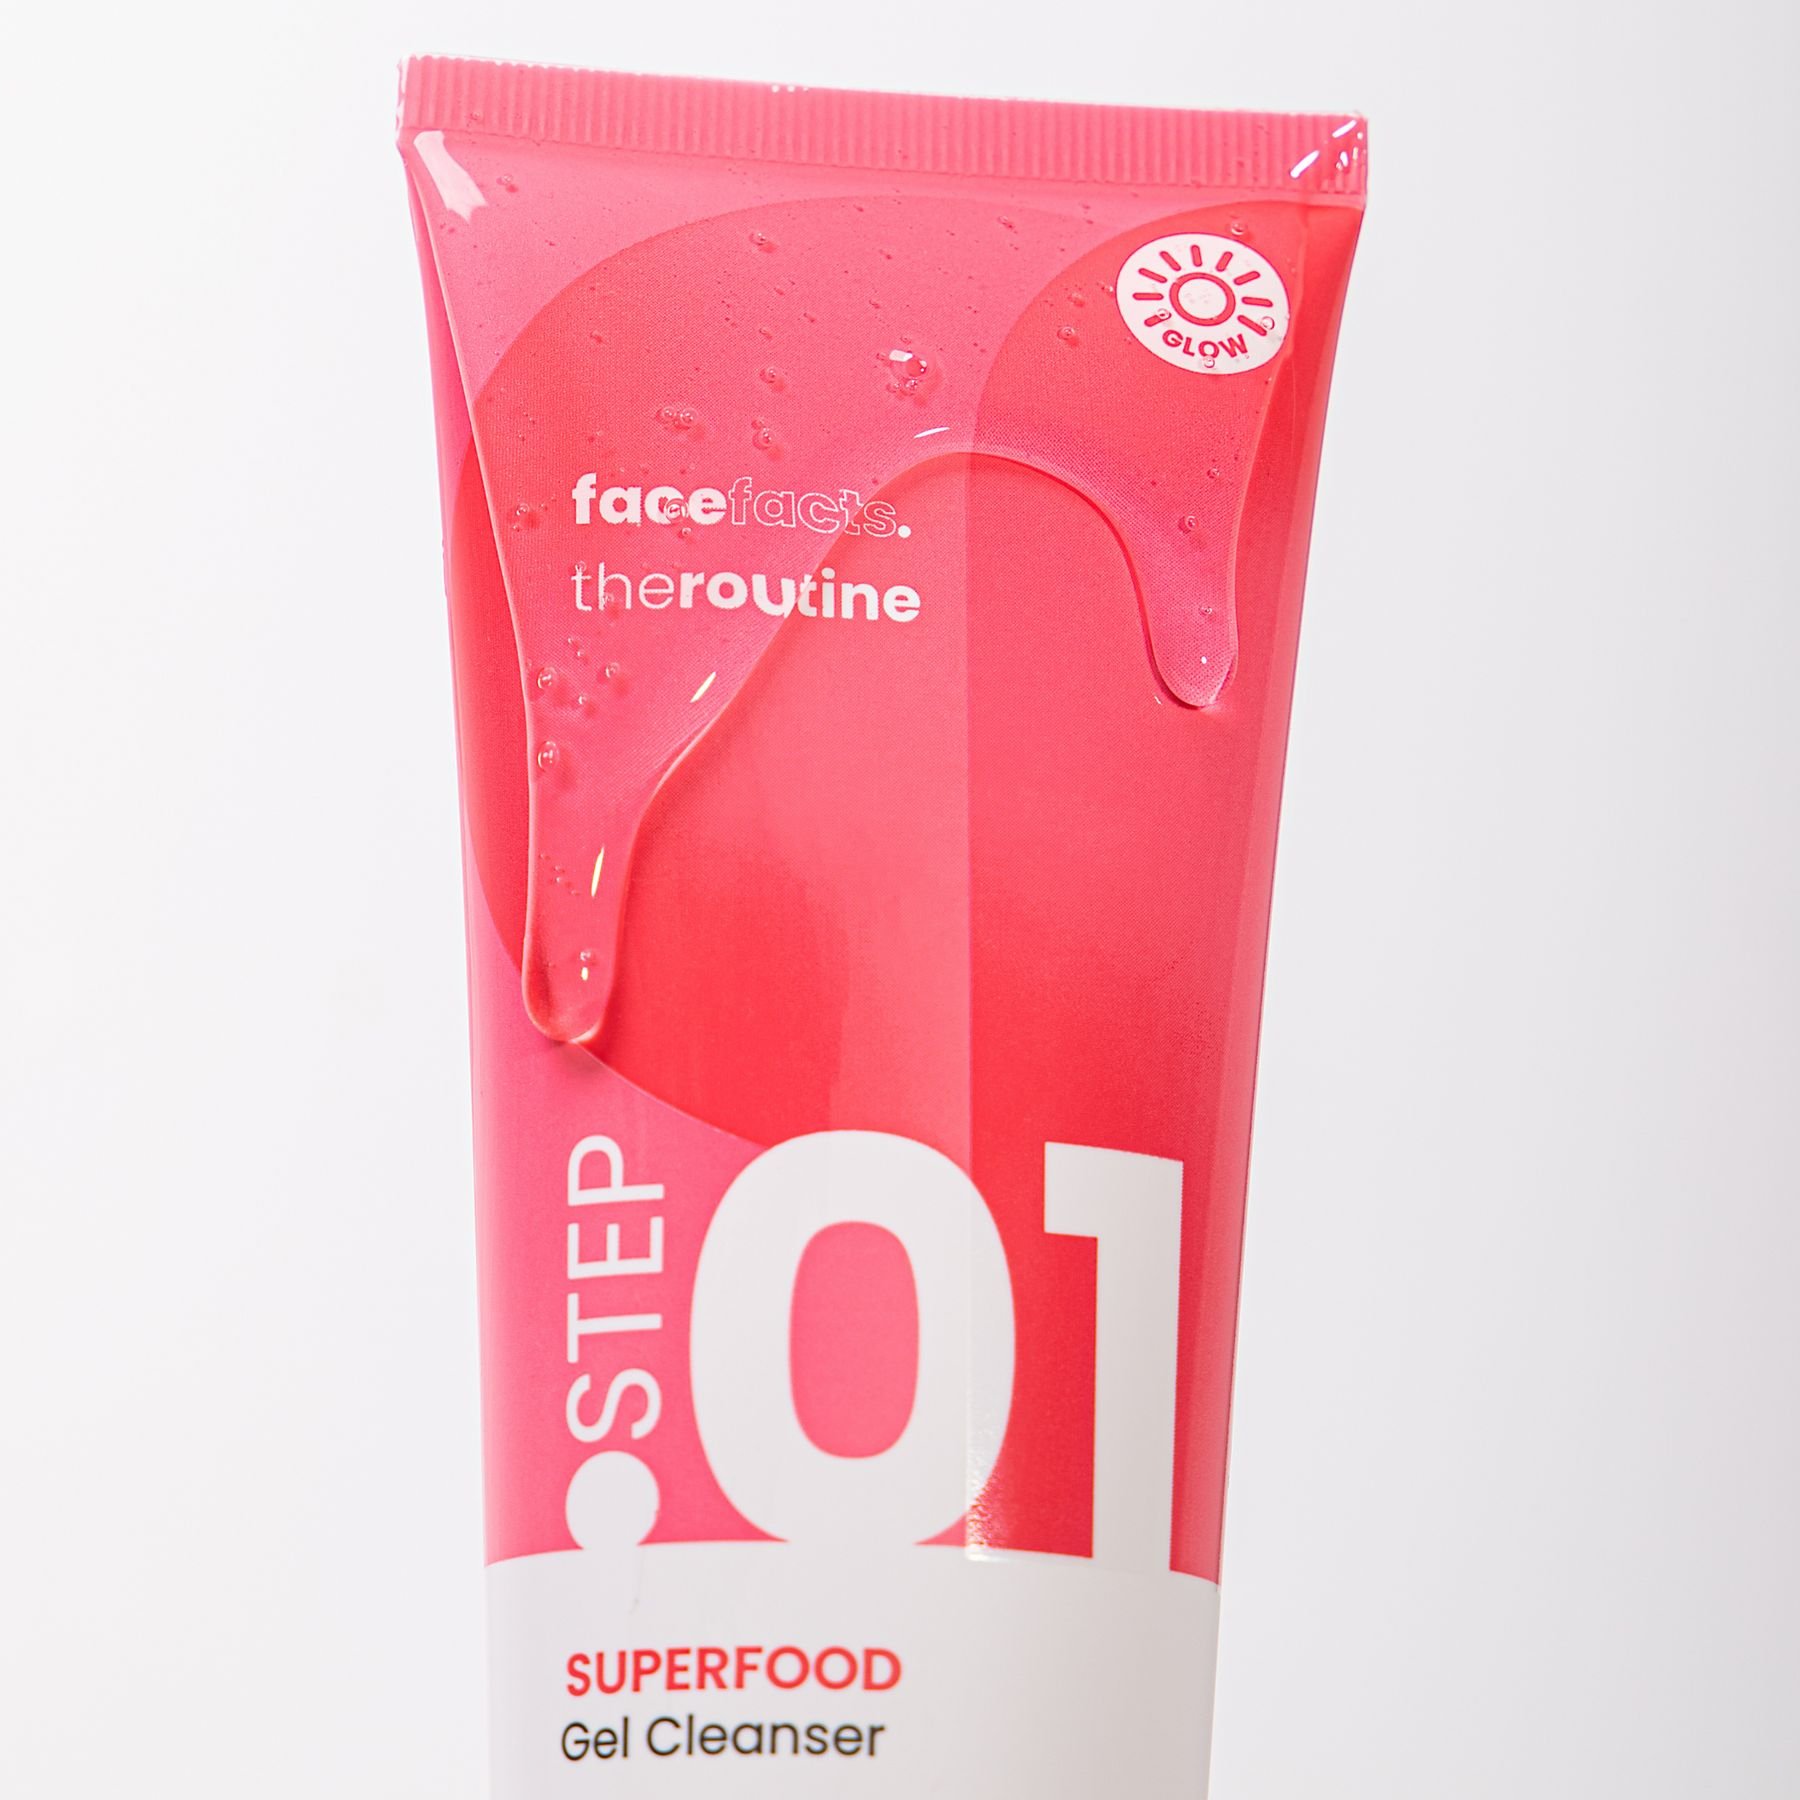 Очищающий гель Face Facts The Routine Step 1 Superfood Gel Cleanser 120 мл - фото 2